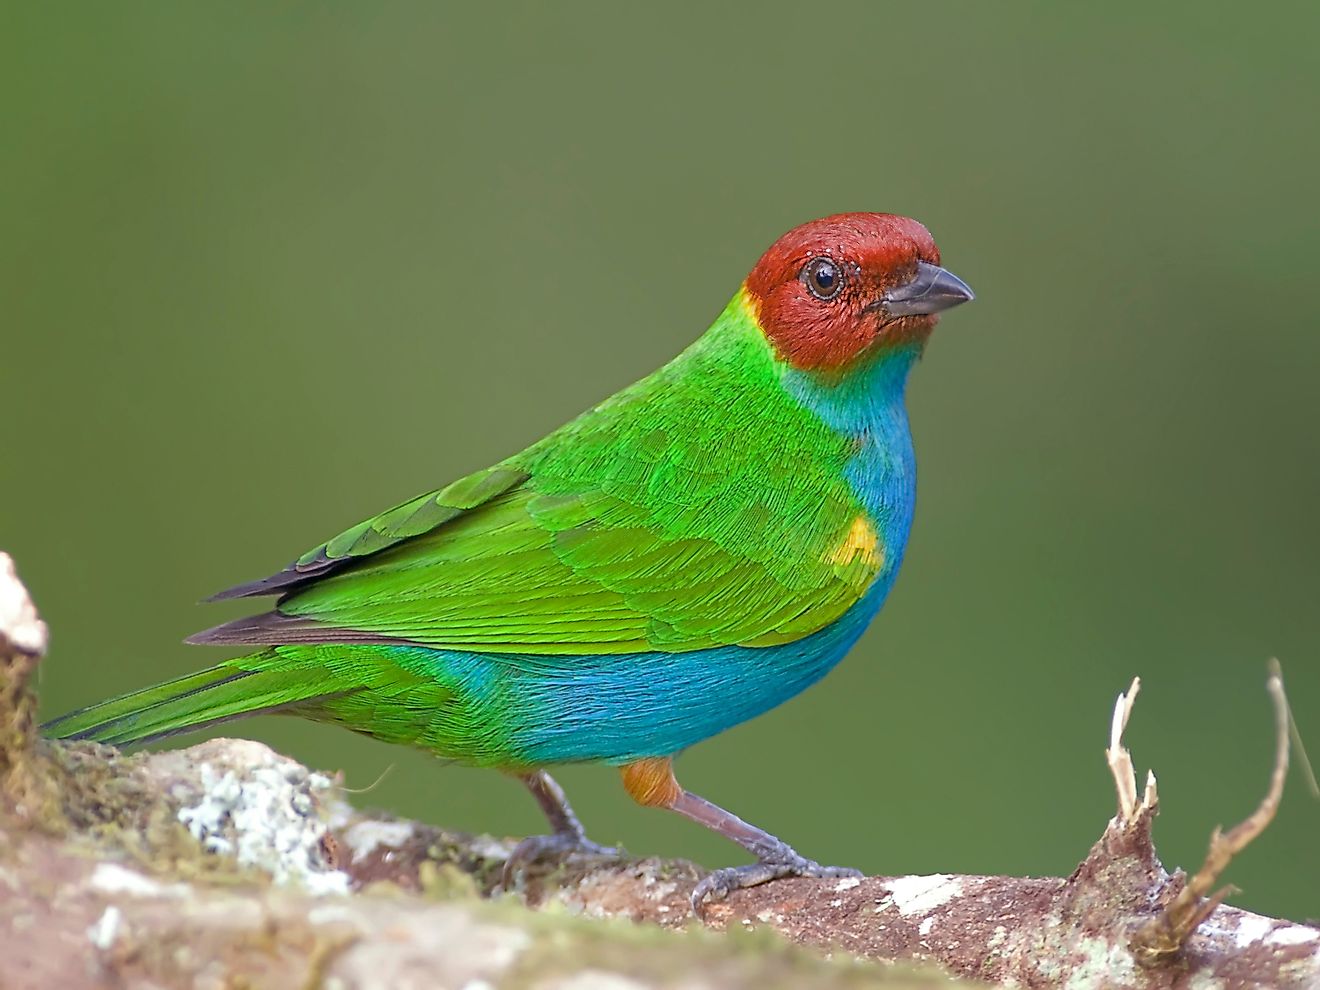 Bay-headed Tanager. Image credit: Agami Photo Agency/Shutterstock.com